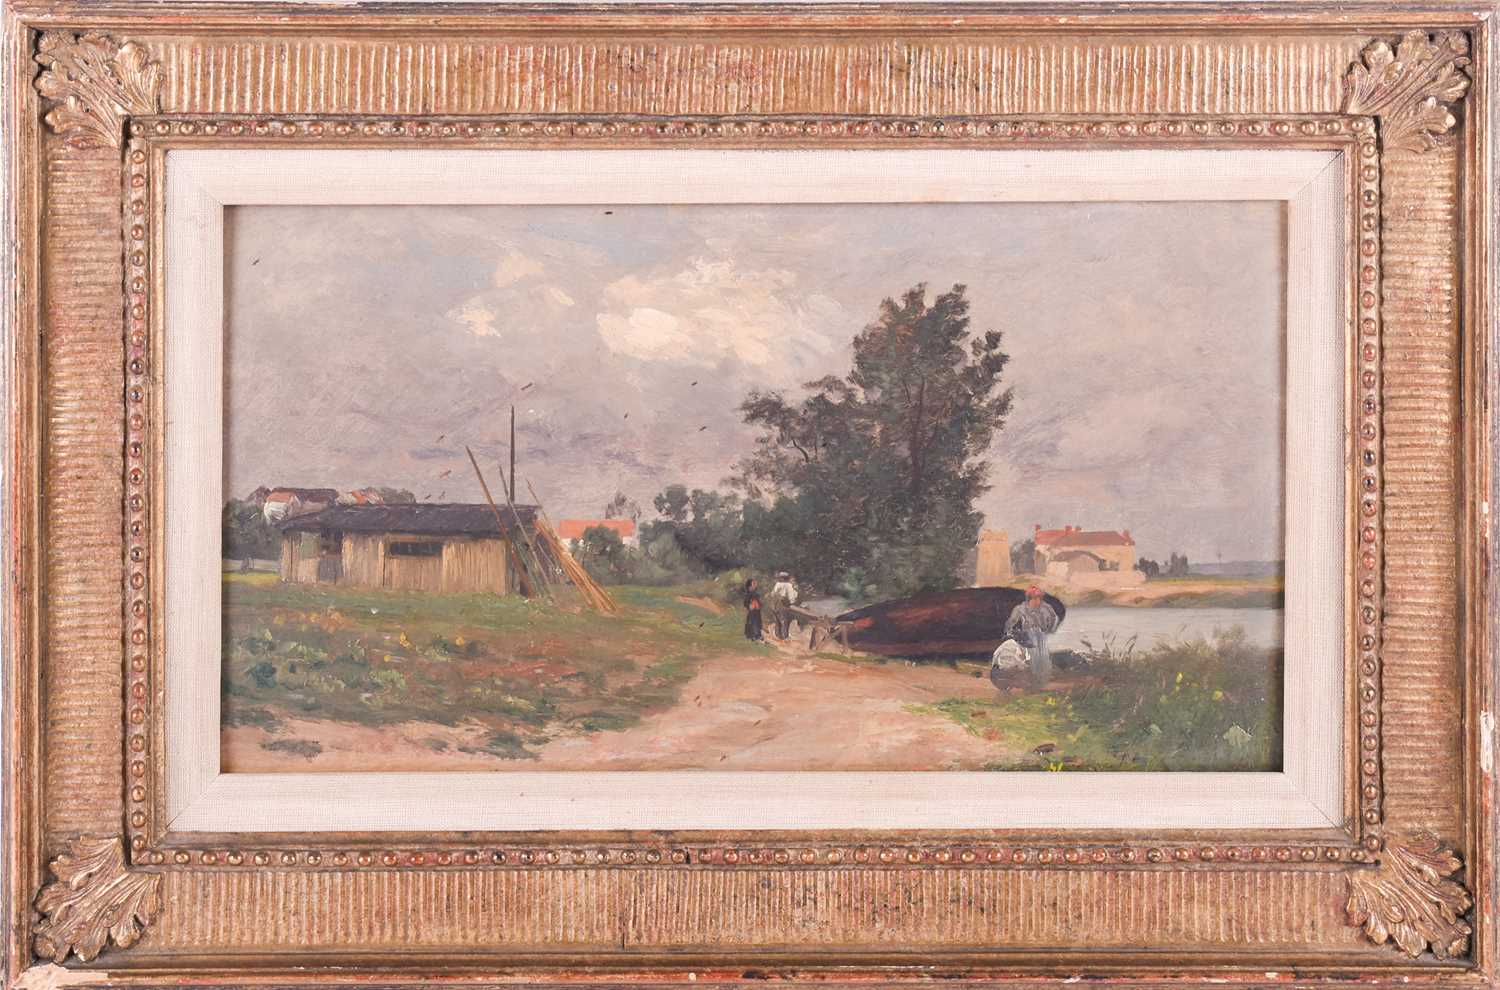 Attributed to Charles Joseph Beauverie (1839-1924) French, a rural scene with figures and boat